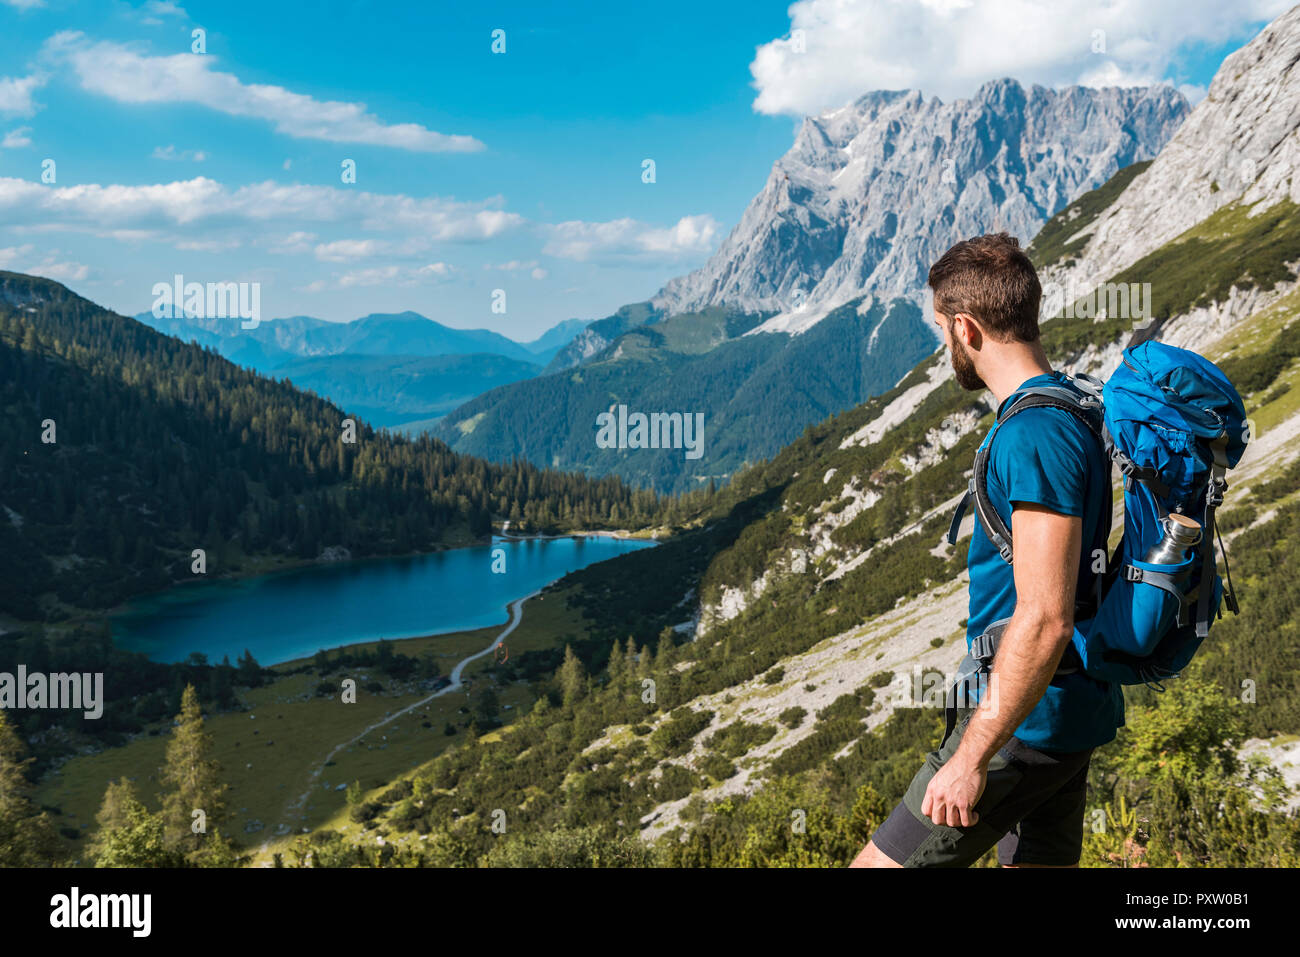 Austria, Tyrol, Young man hiking in the maountains at Lake Seebensee Stock Photo